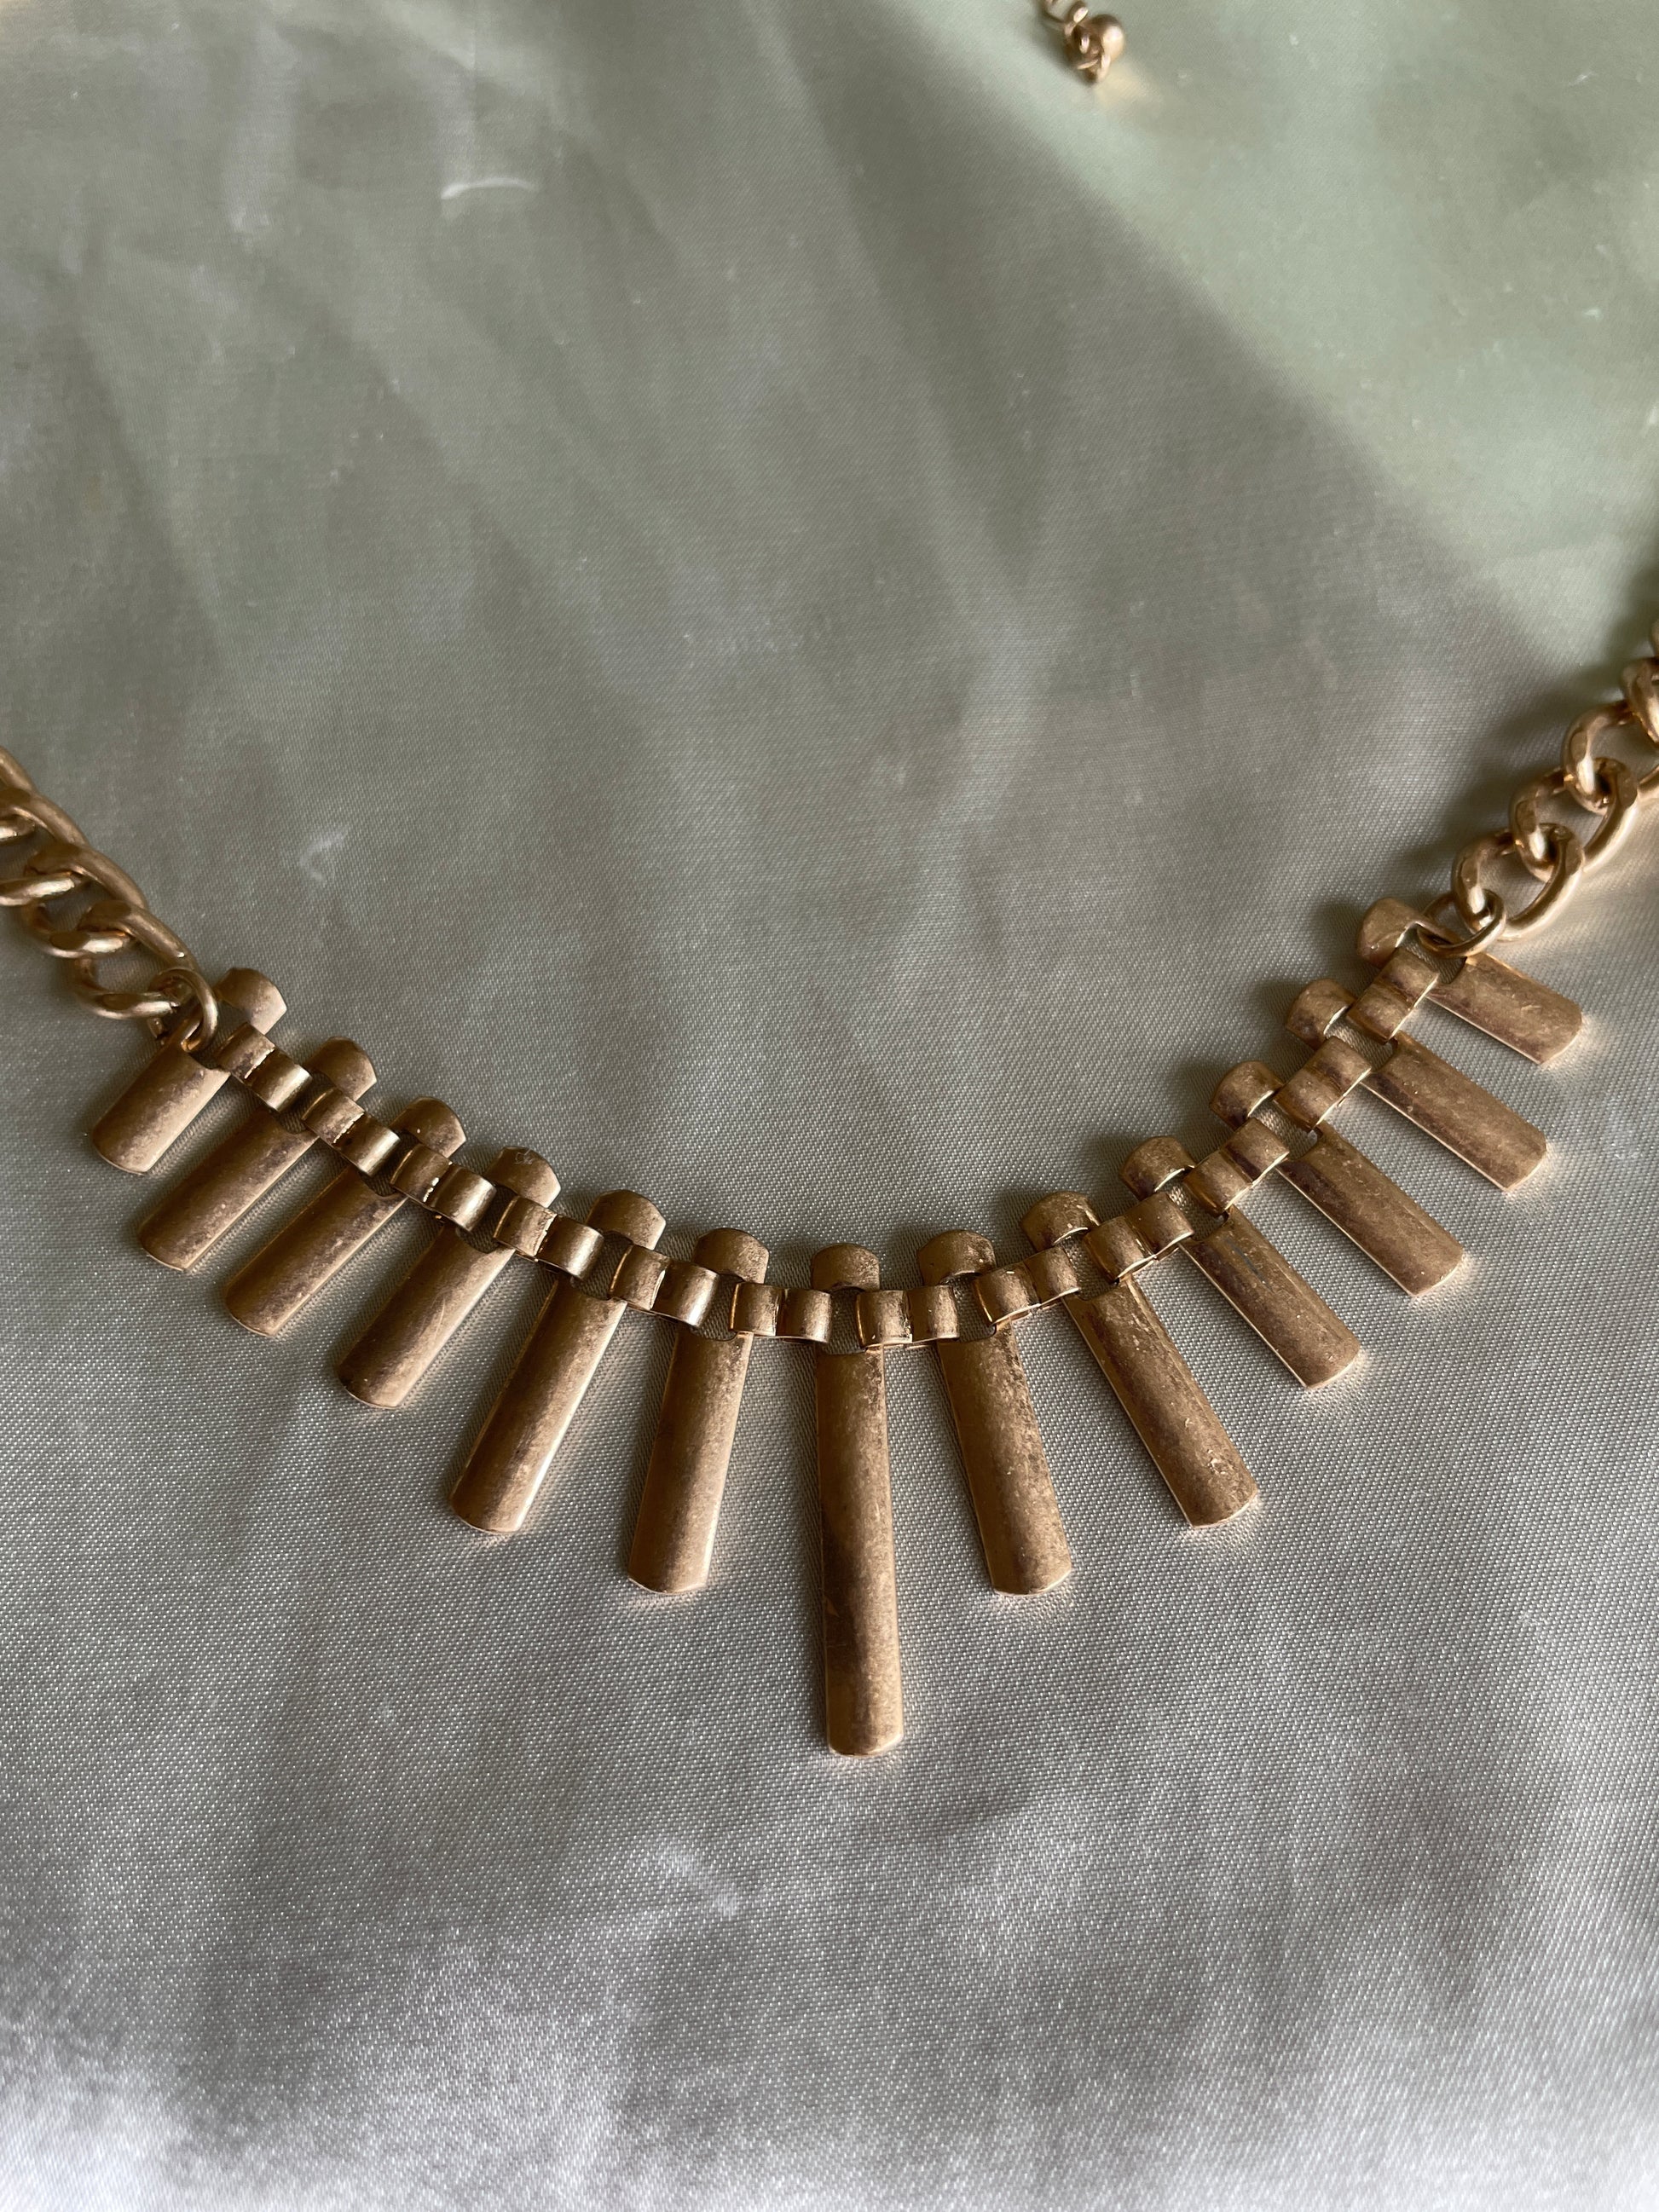  80s Gold Tone Spiked Egyptian Style Necklace